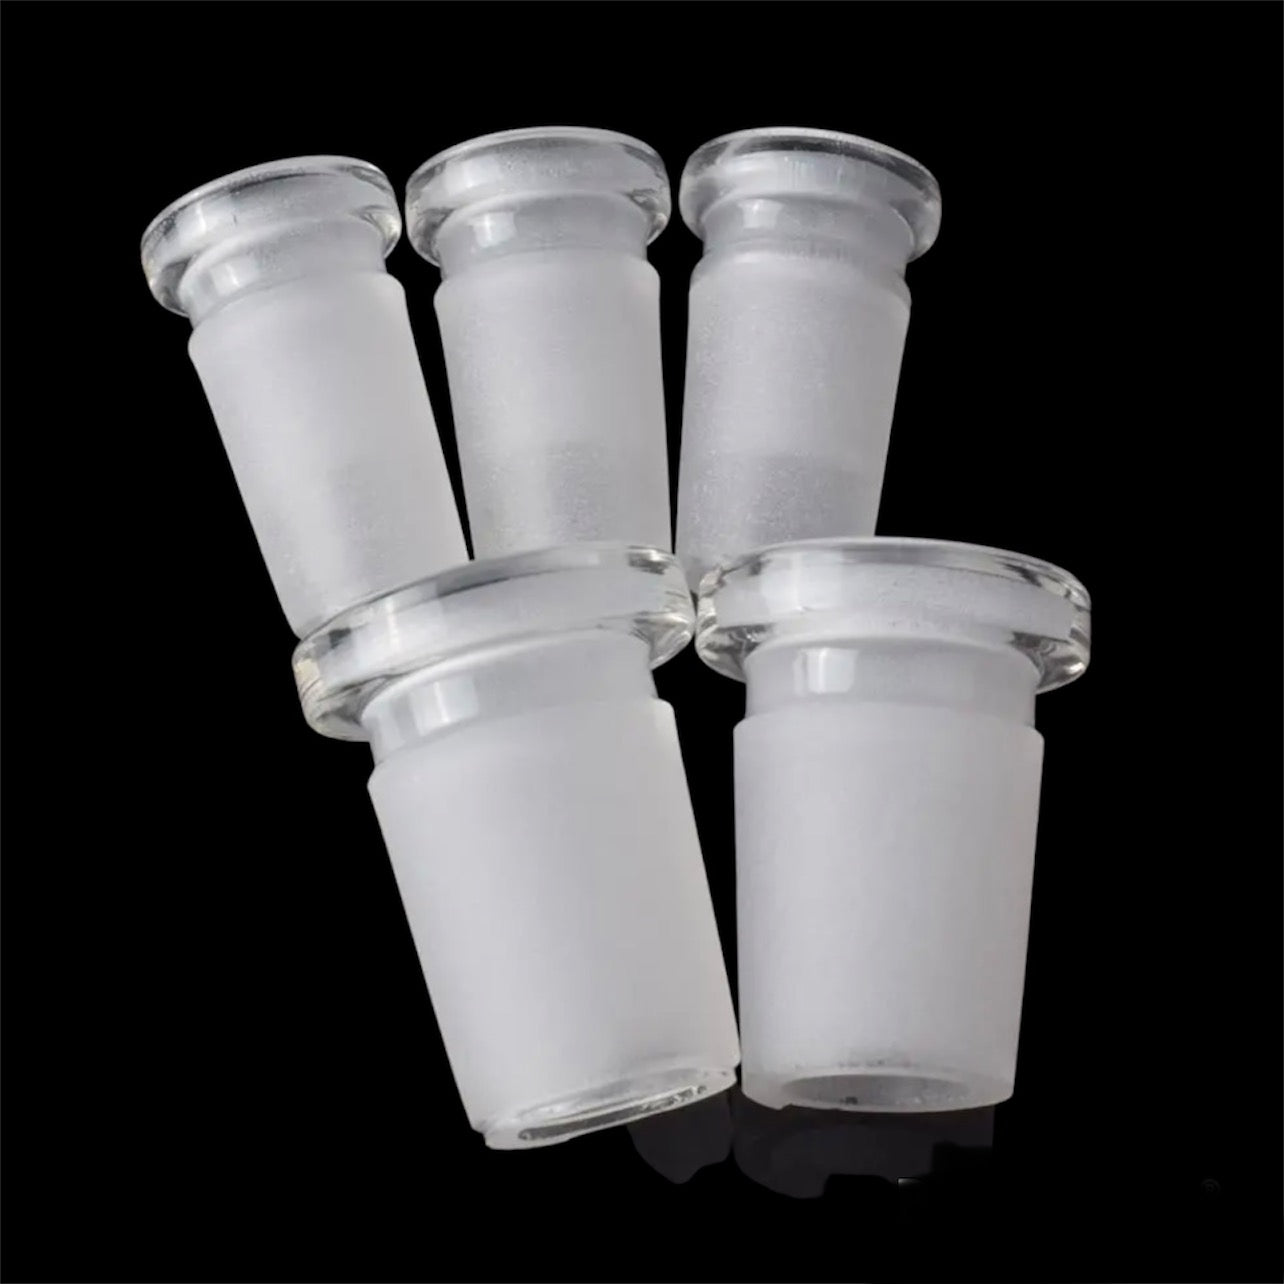 18/14mm Male to Female Adapter - Clear